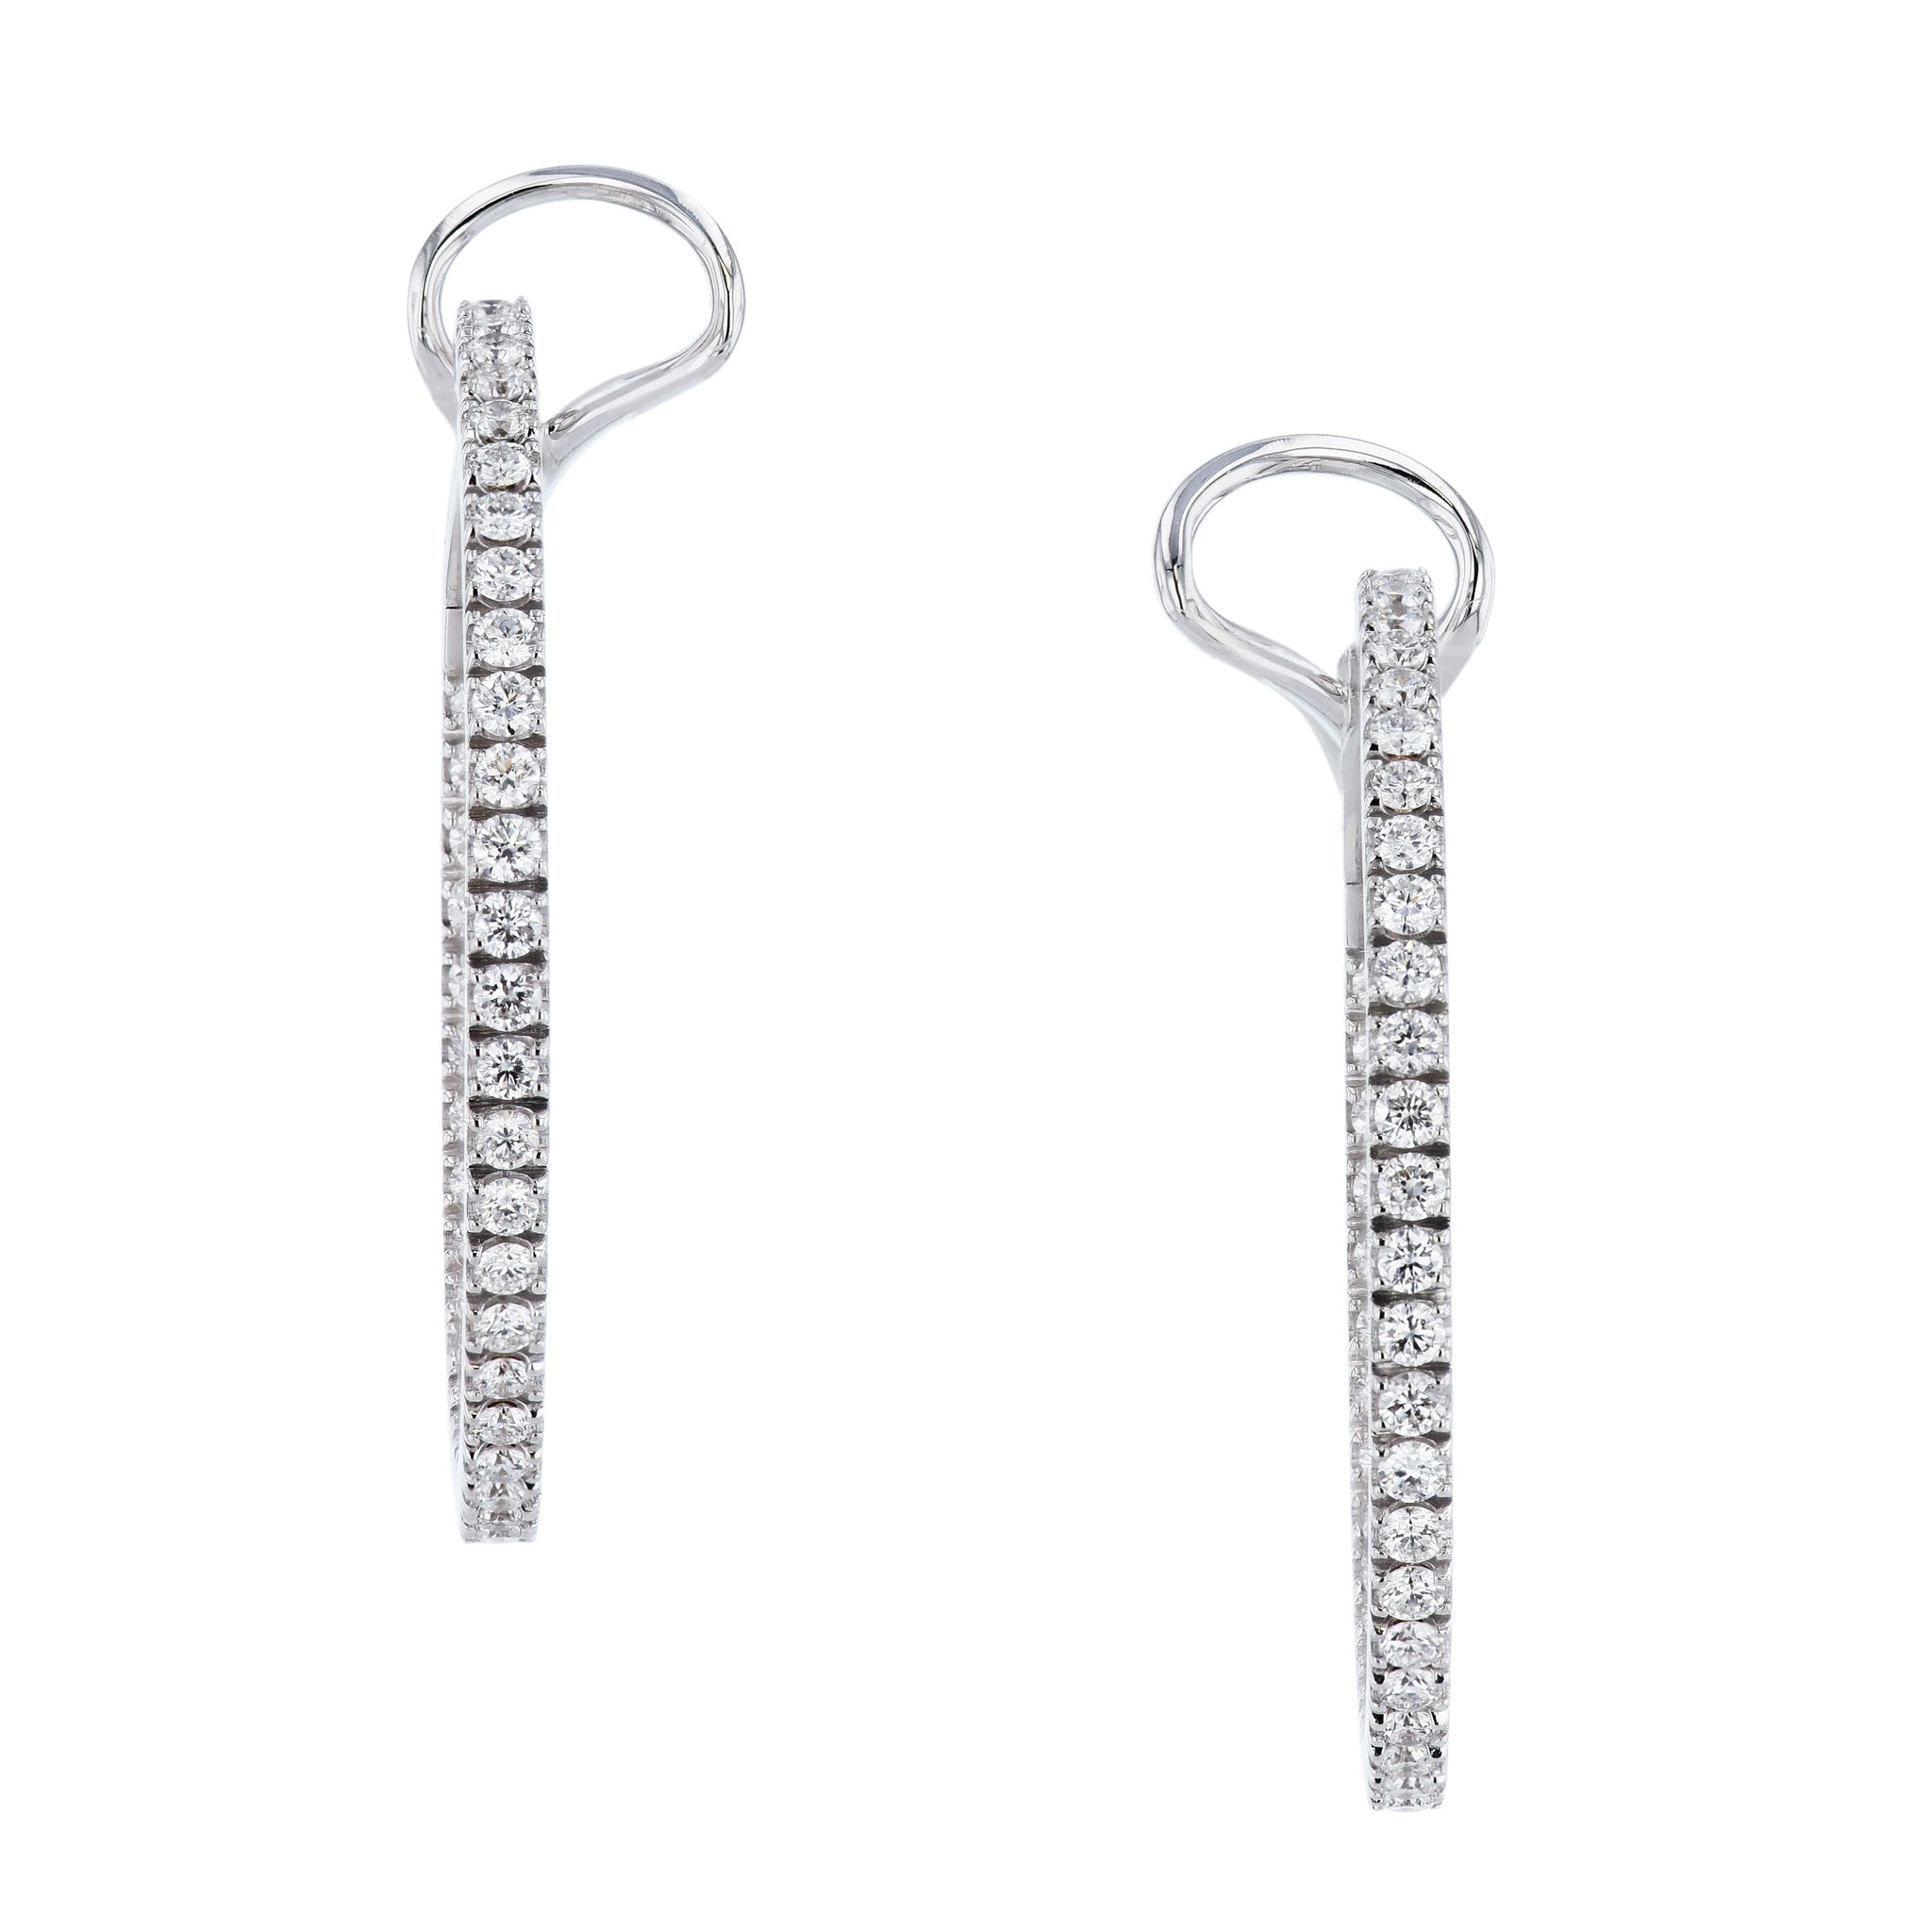 Diamond Pave White Gold Hoop Earrings Earrings Curated by H